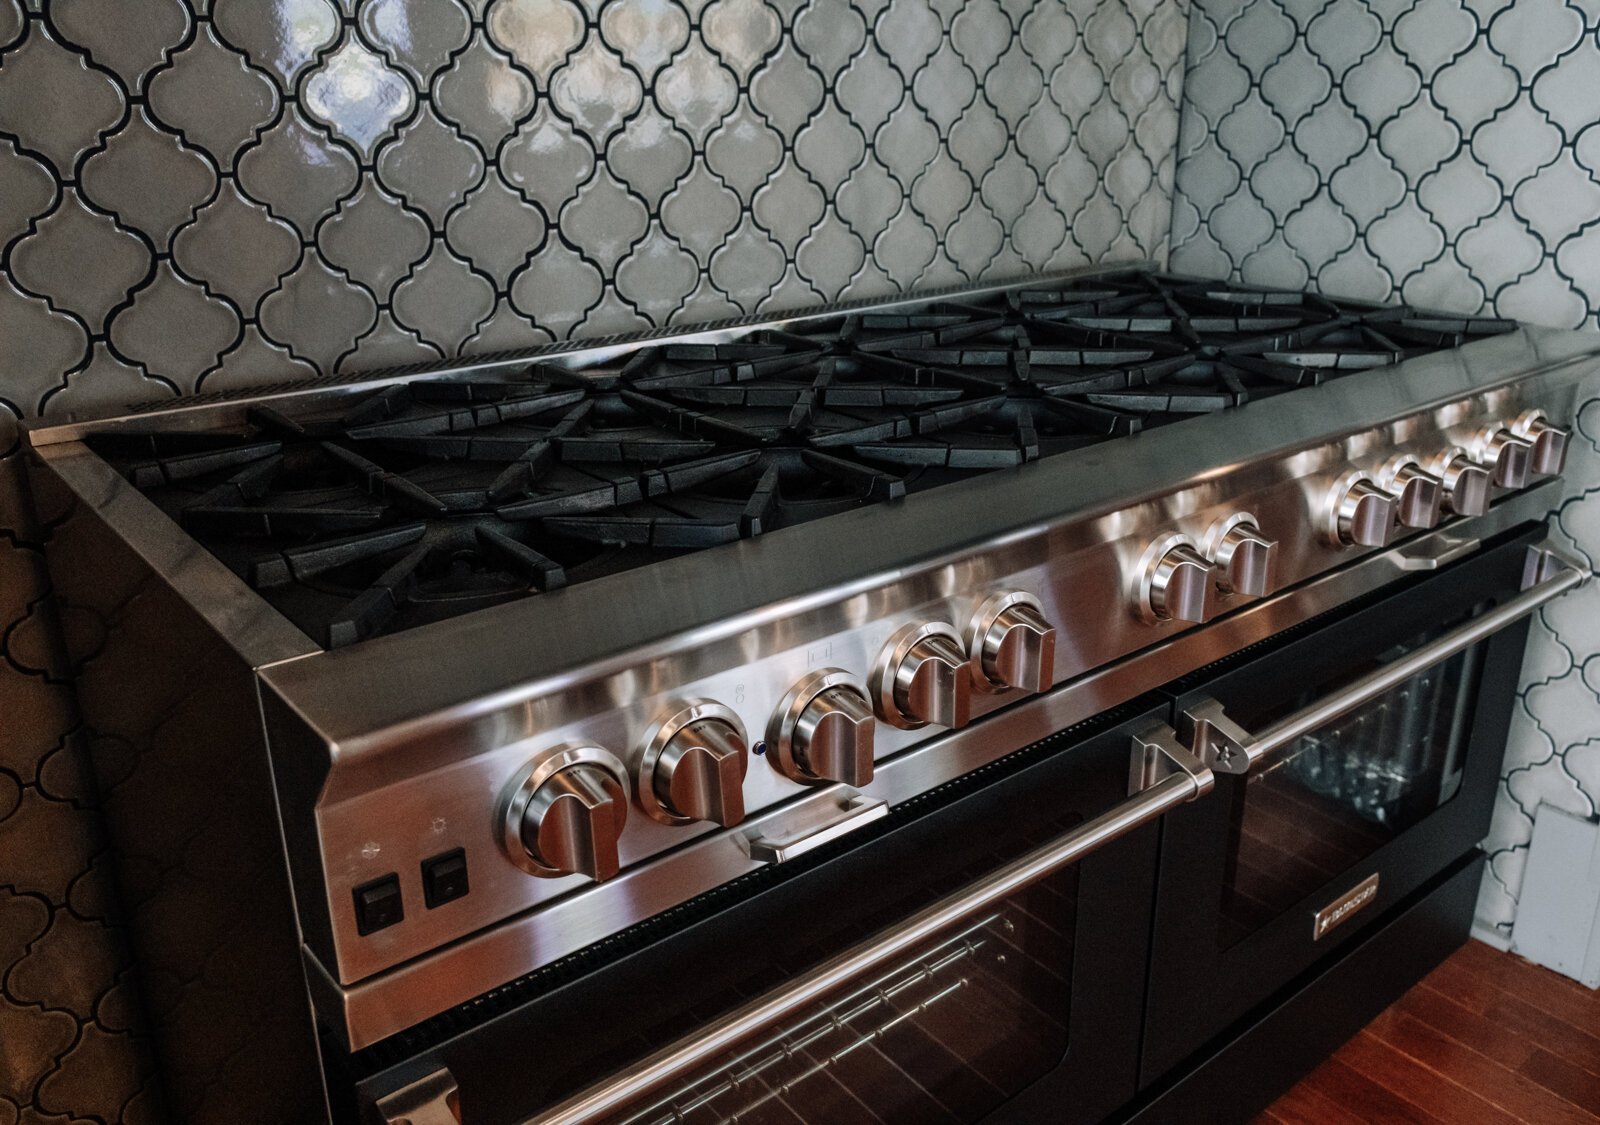 Gas burners in the Sanctuary's commercial-grade kitchen.